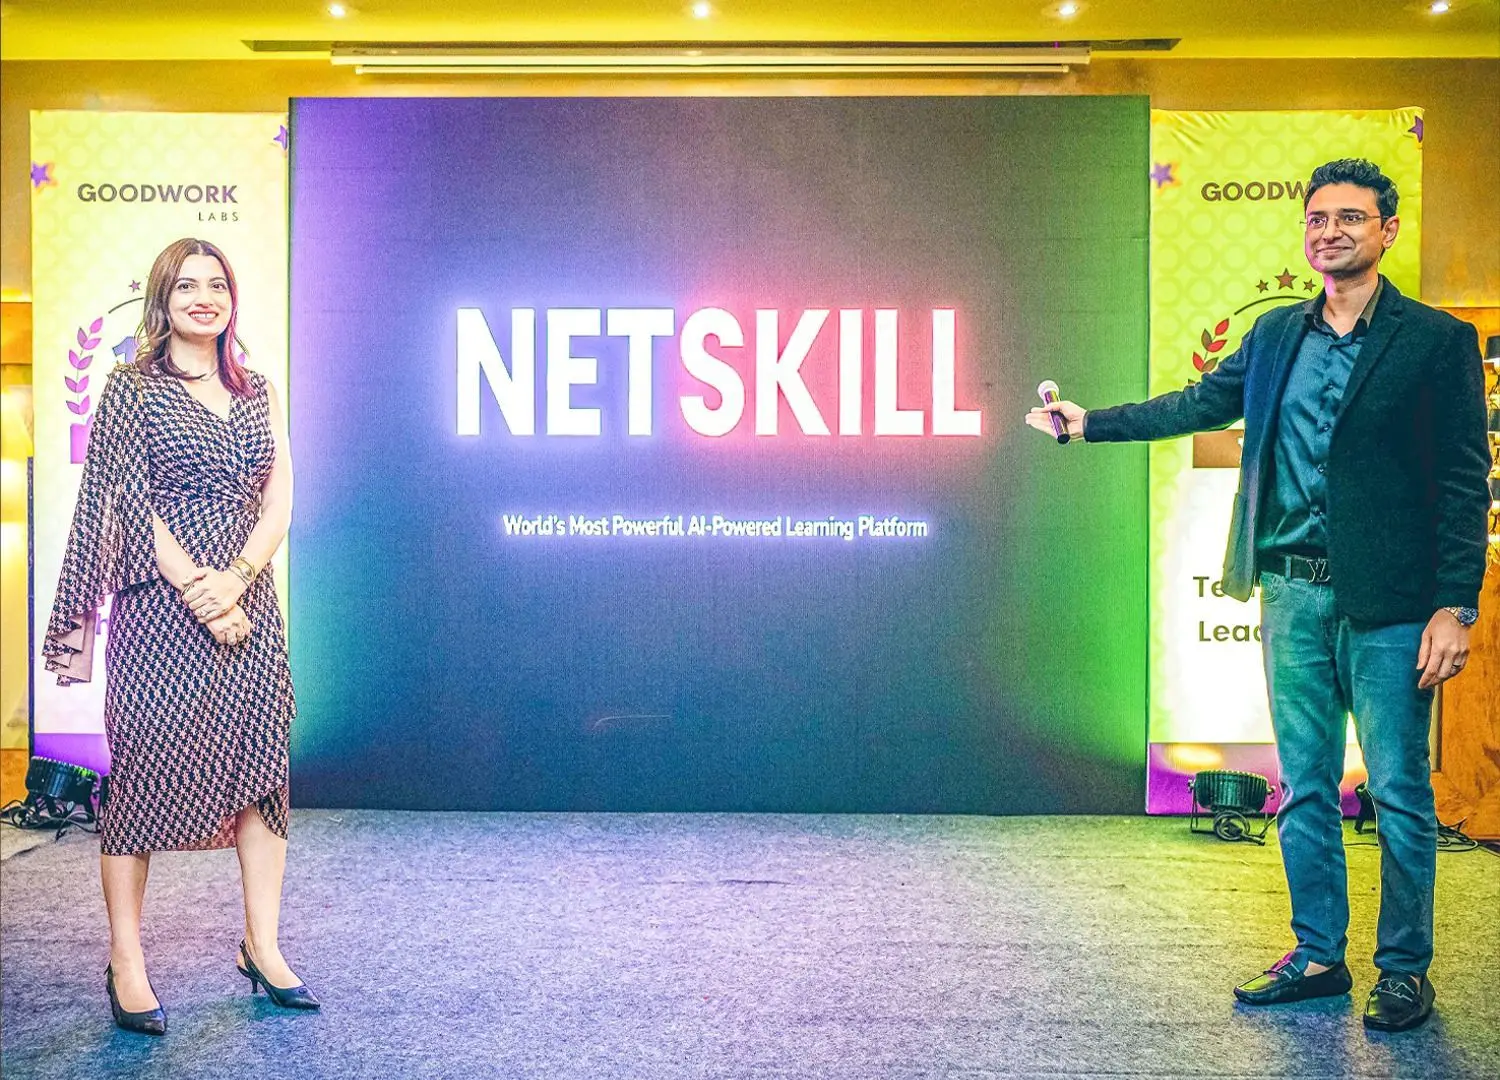 Glimpses From The Grand Launch Event Of NetSkill